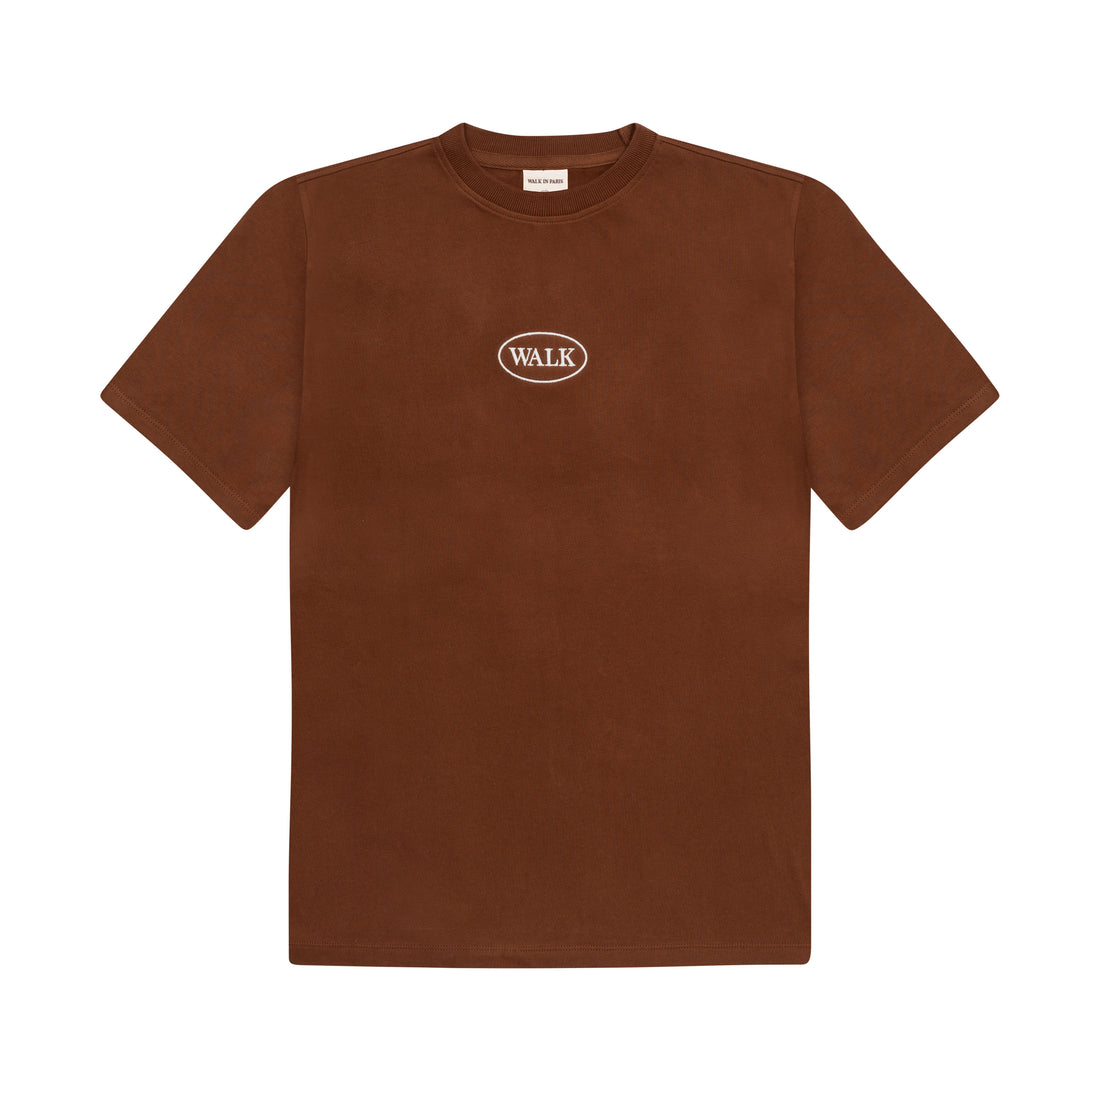 THE CLASSIC BROWN T-SHIRT